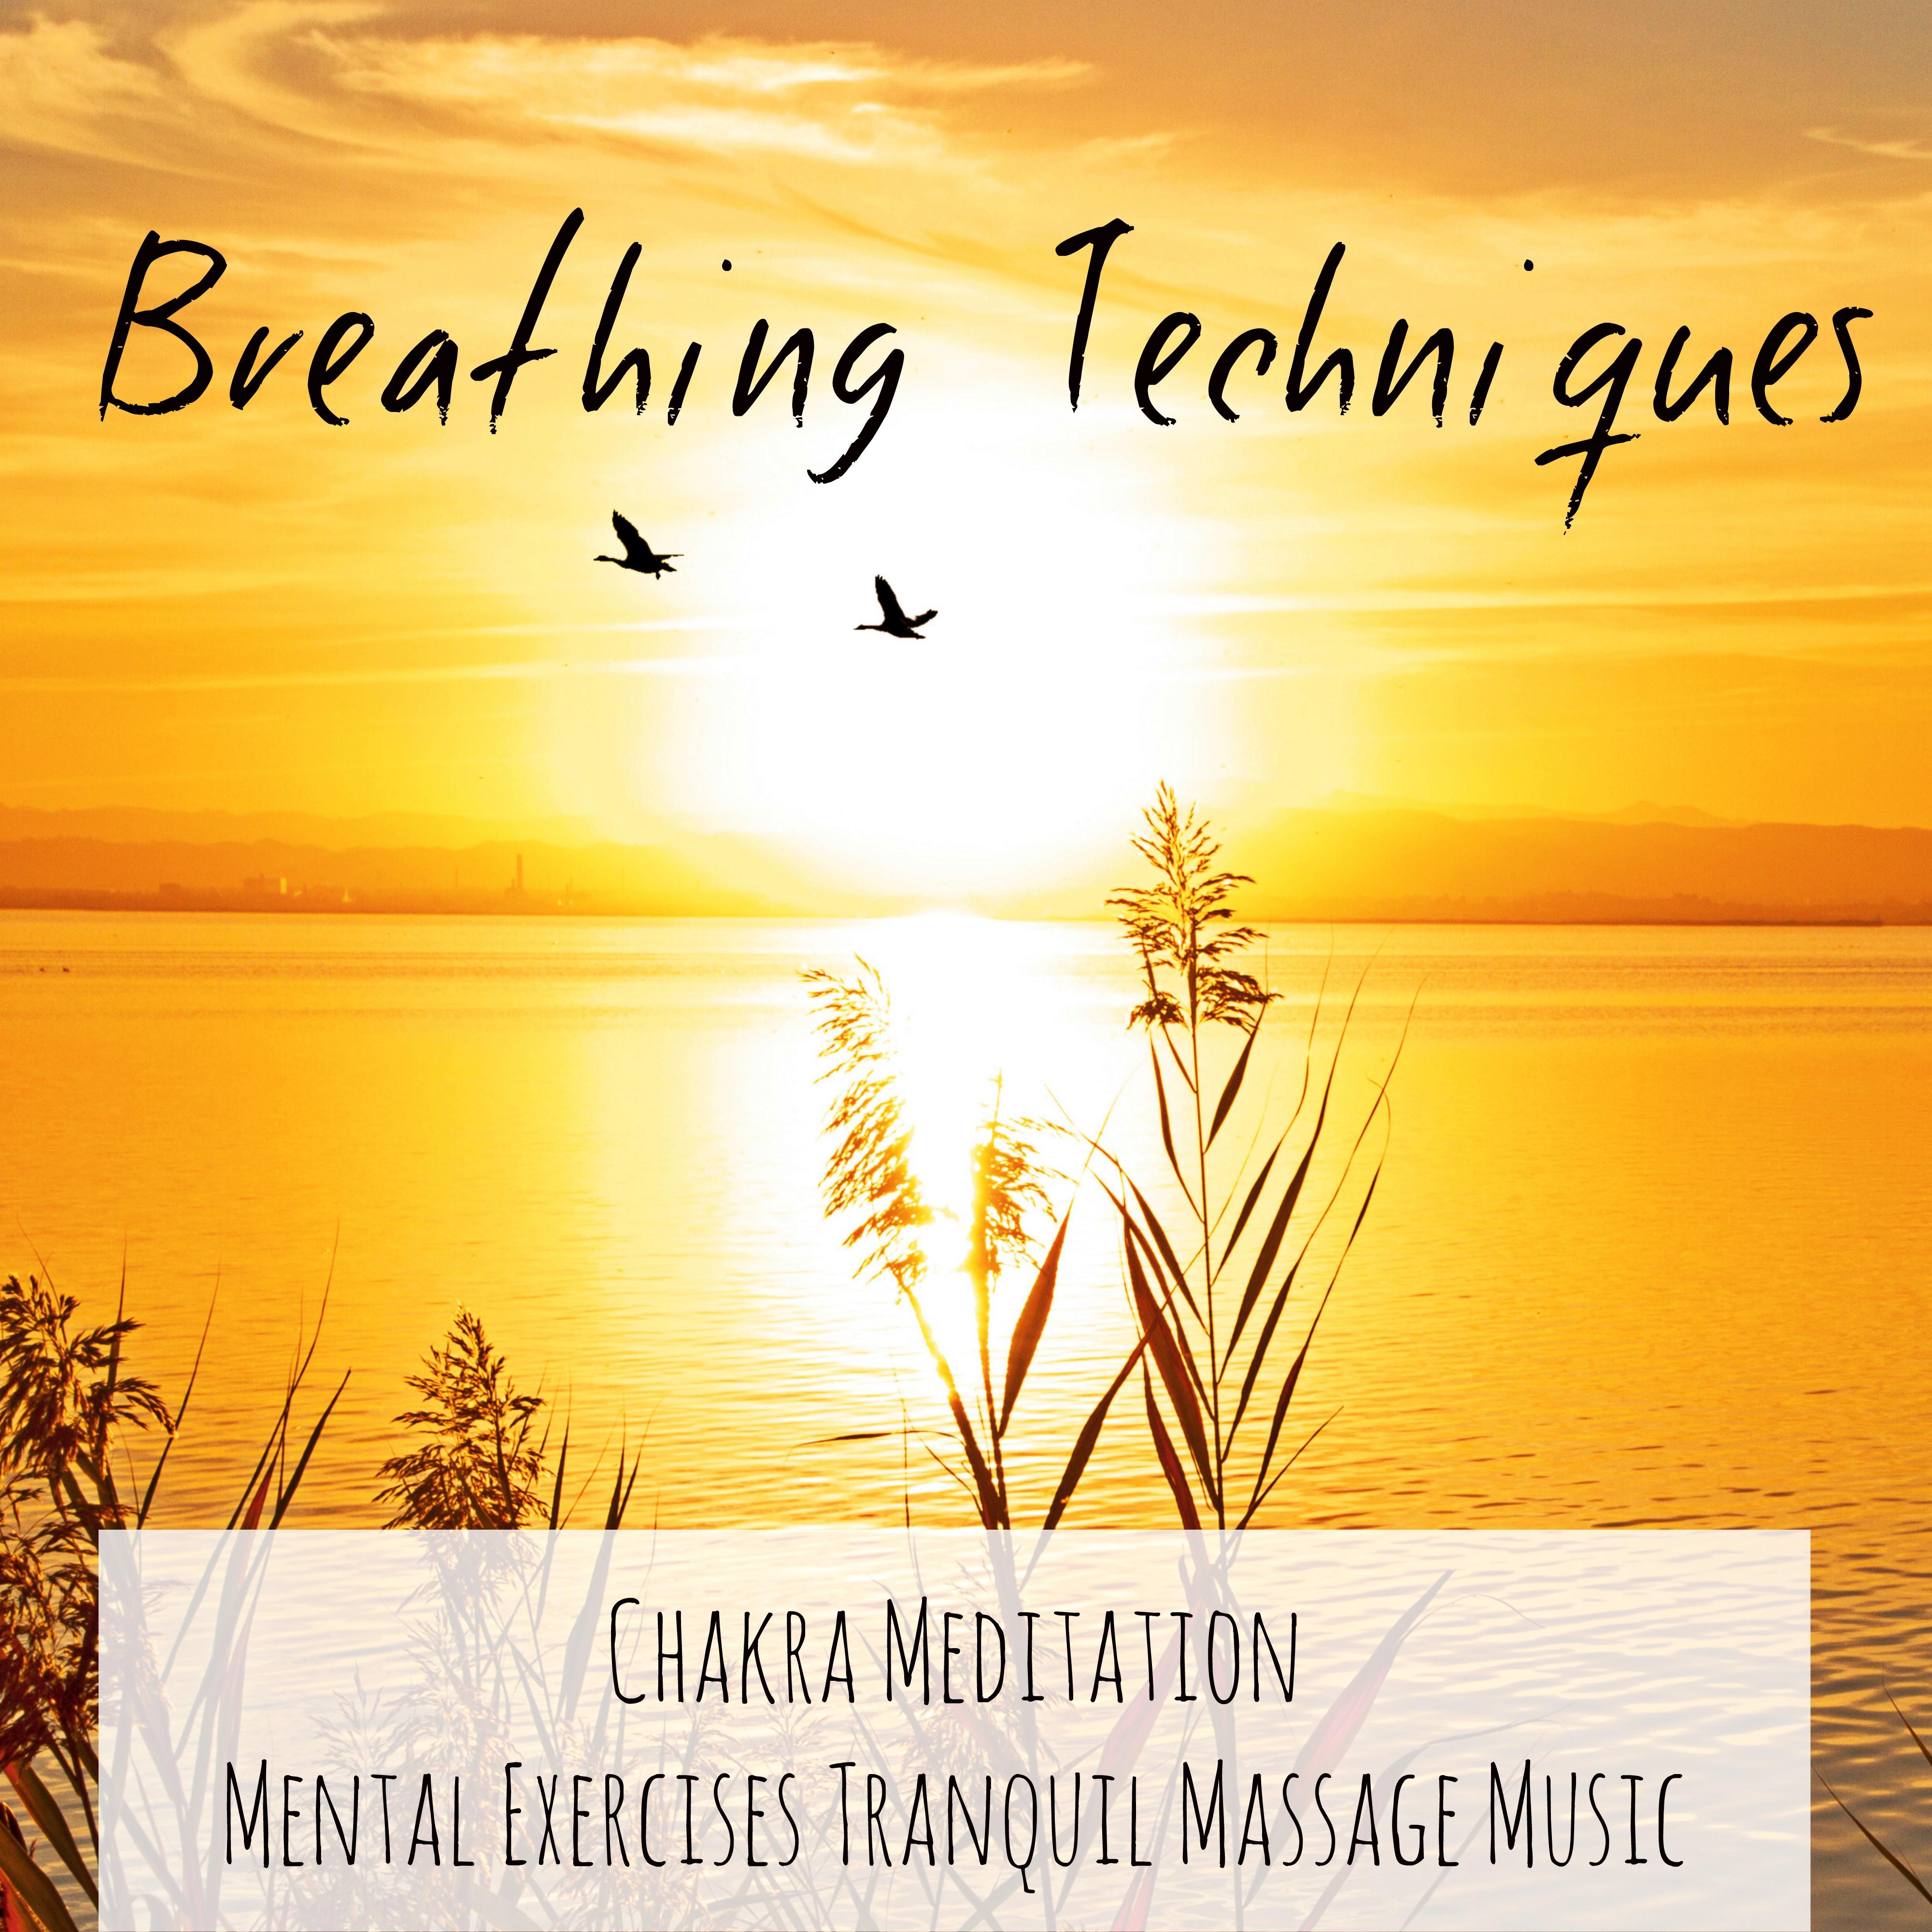 Breathing Techniques - Chakra Meditation Mental Exercises Tranquil Massage Music with New Age Instrumental New Age Healing Sounds